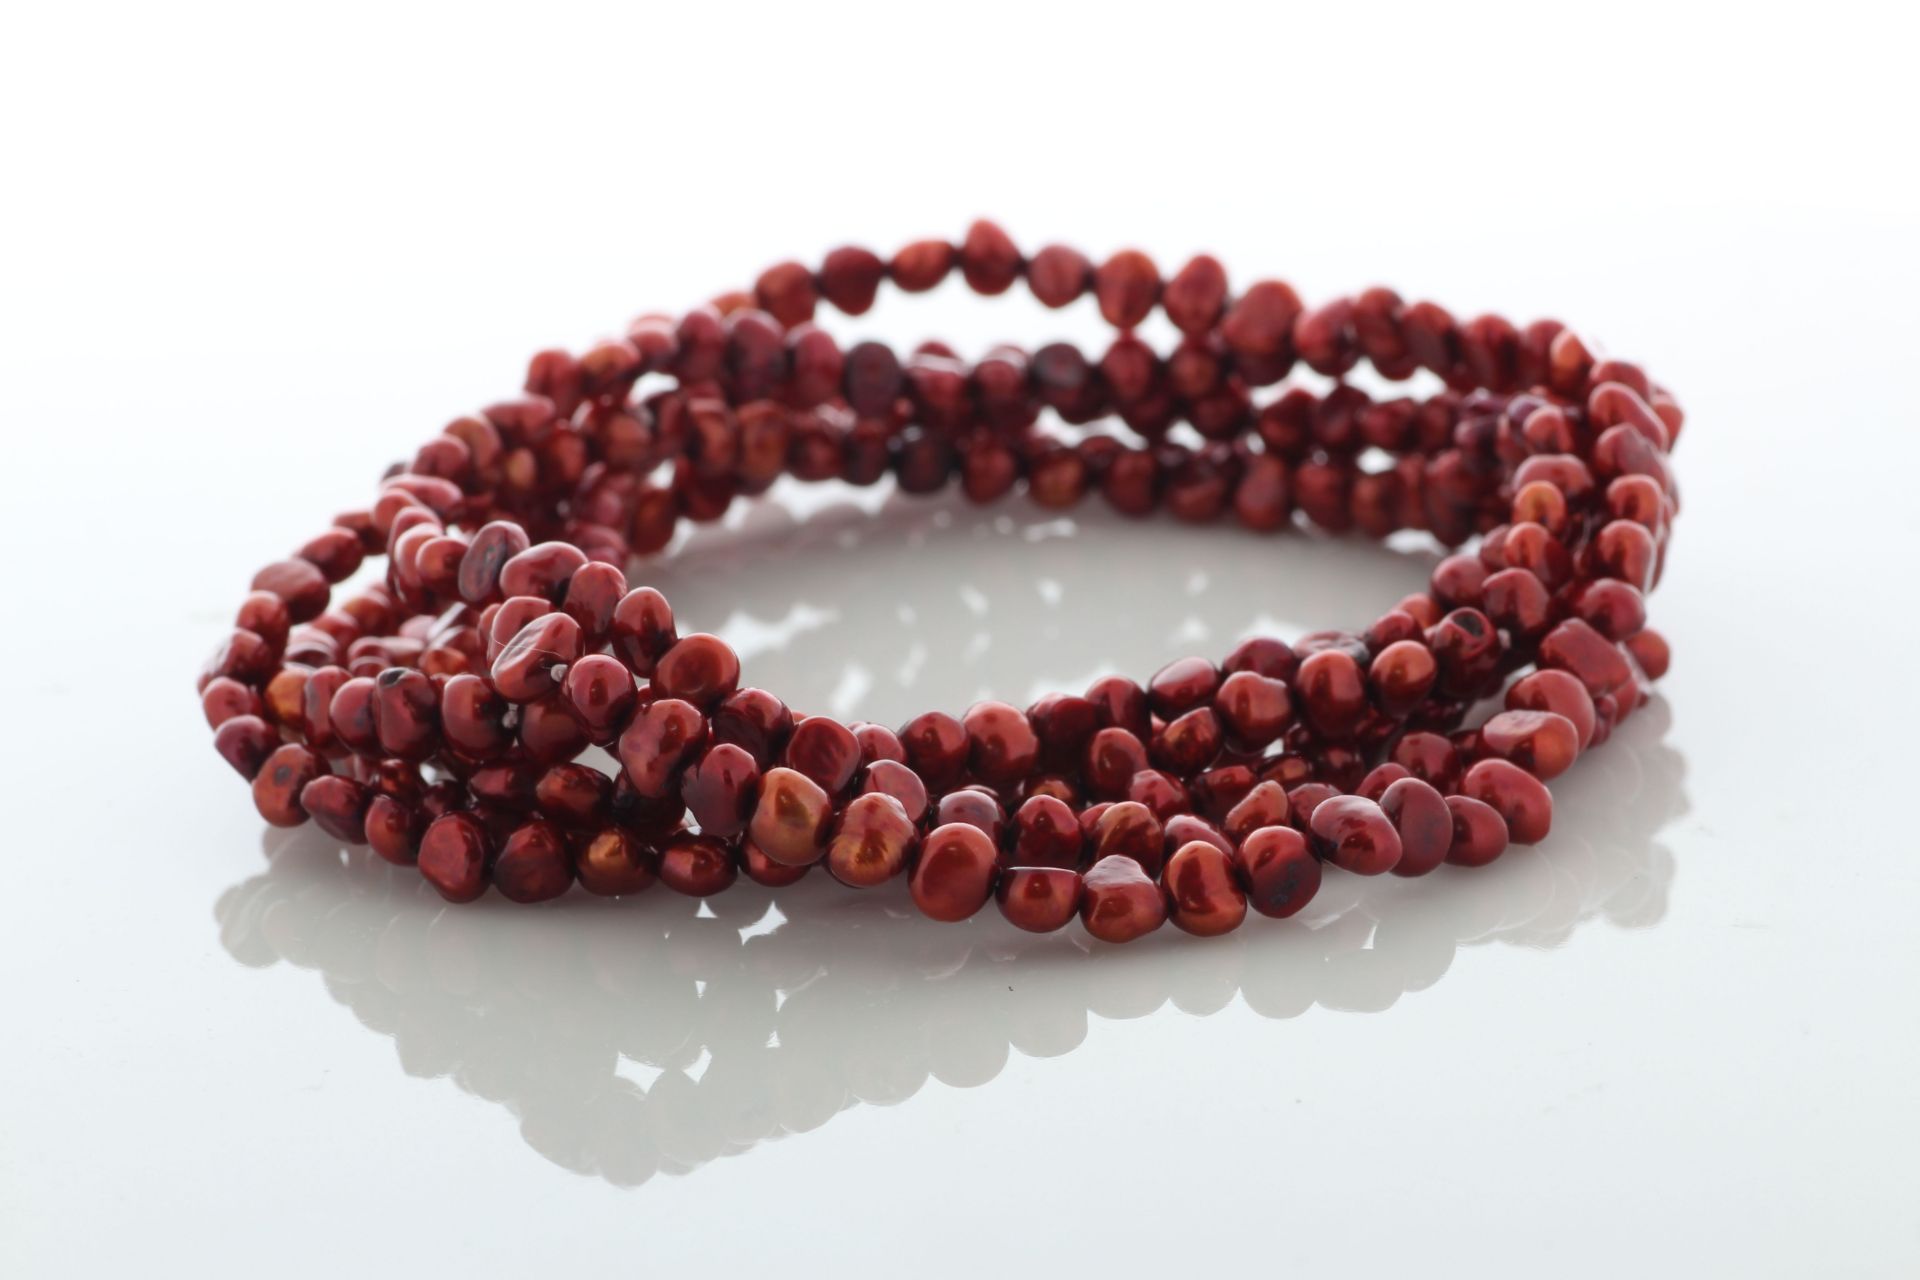 64 Inch Baroque Shaped Cherry 5.0 - 6.0mm Pearl Necklace - Valued By AGI £475.00 - 5.0 - 6.0mm - Image 2 of 4